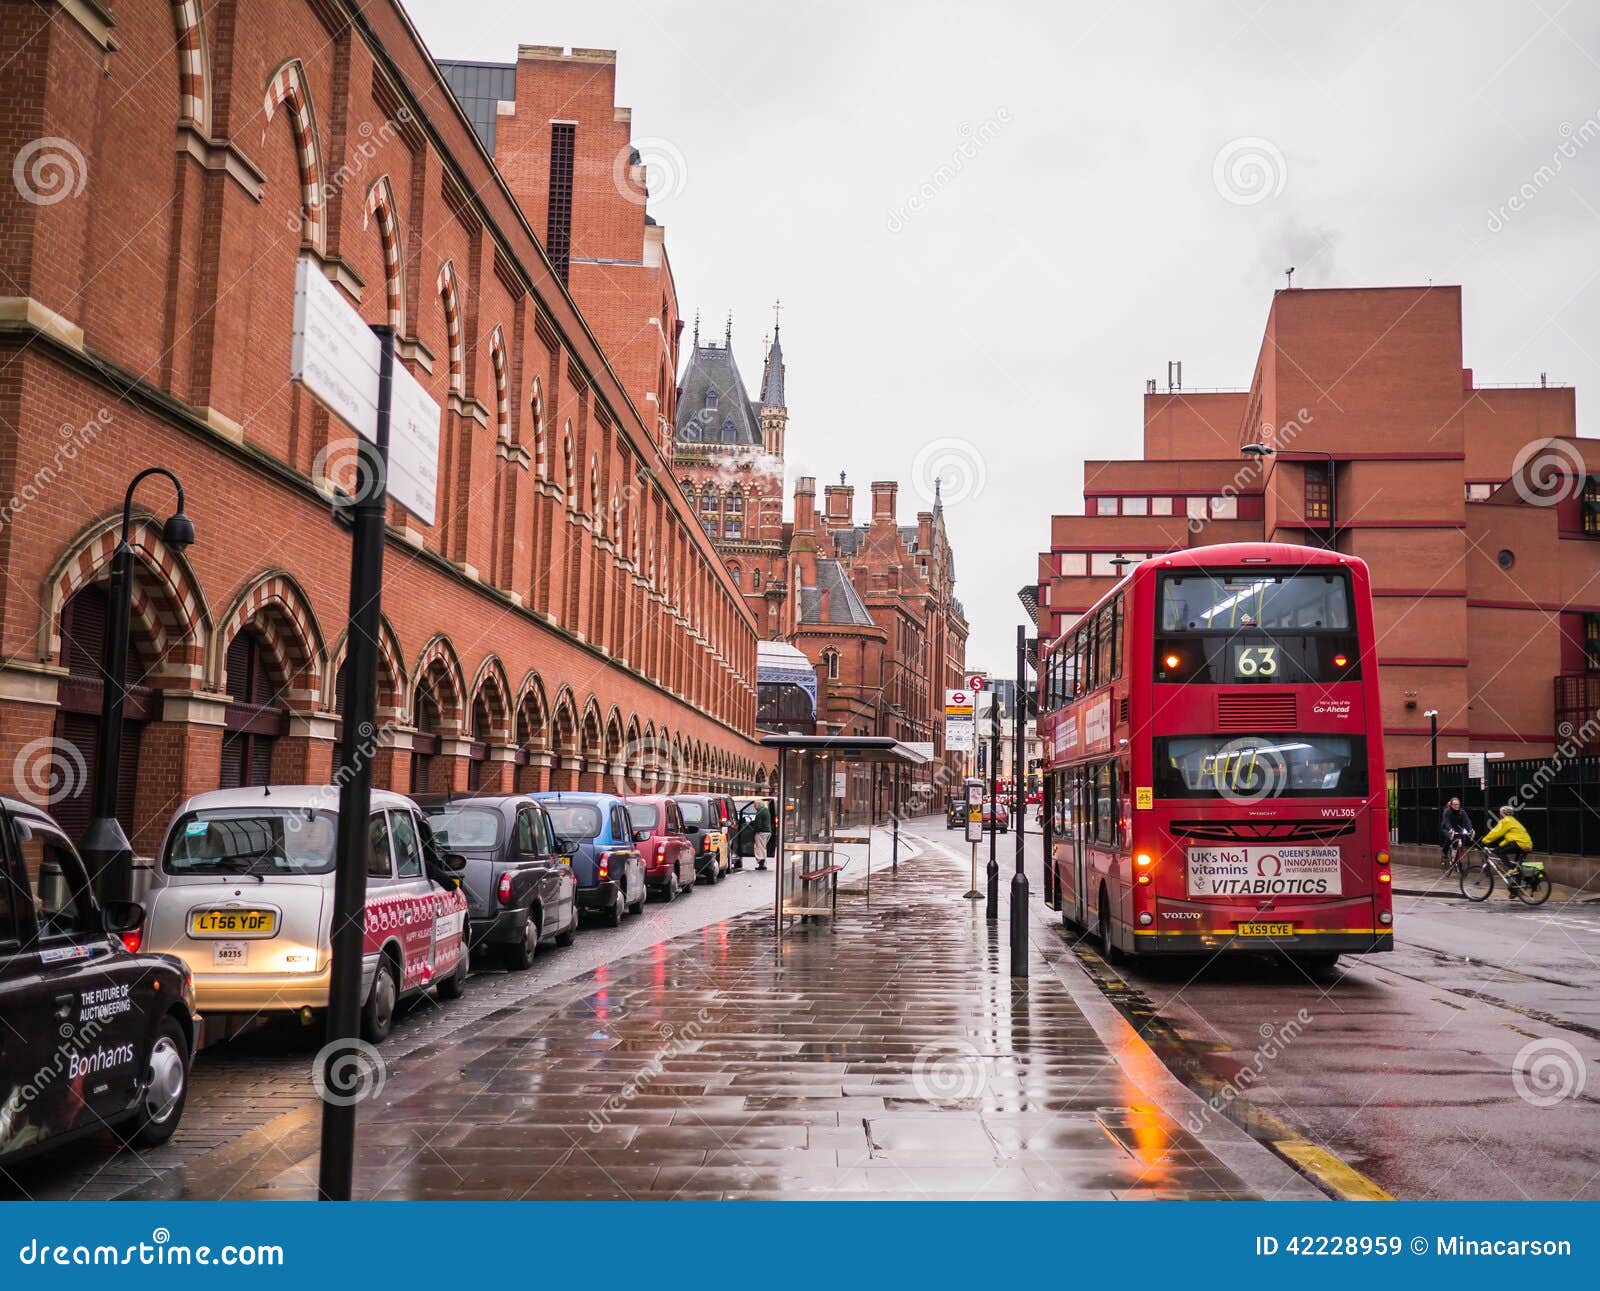 Taxis and Bus on Rainy Street Outside St Pancras Station, Bloomsbury, London  Editorial Stock Image - Image of double, chilly: 42228959